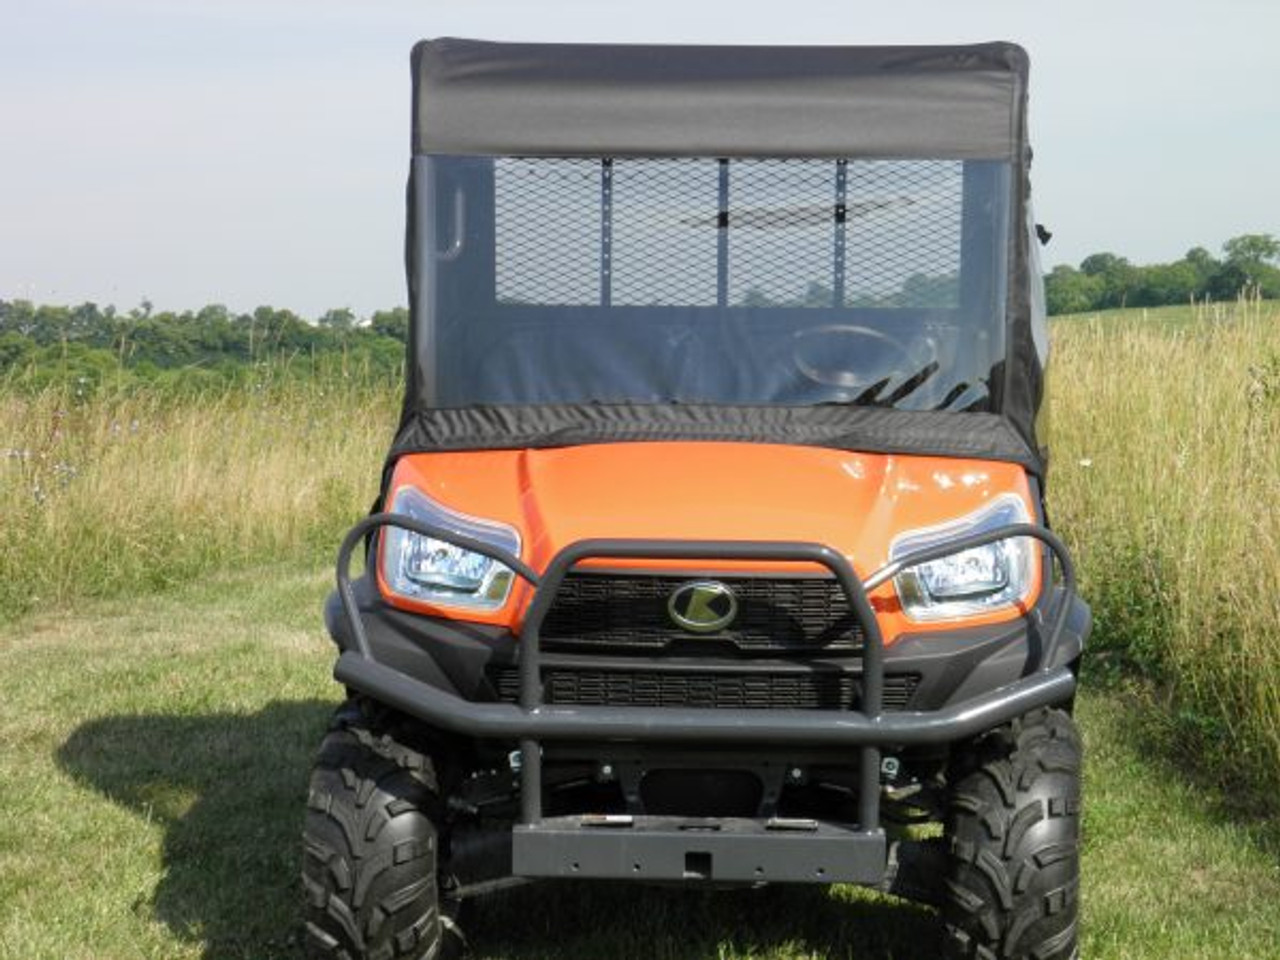 3 Star side x side Kubota RTV X900/X1120 full cab enclosure with vinyl windshield front view